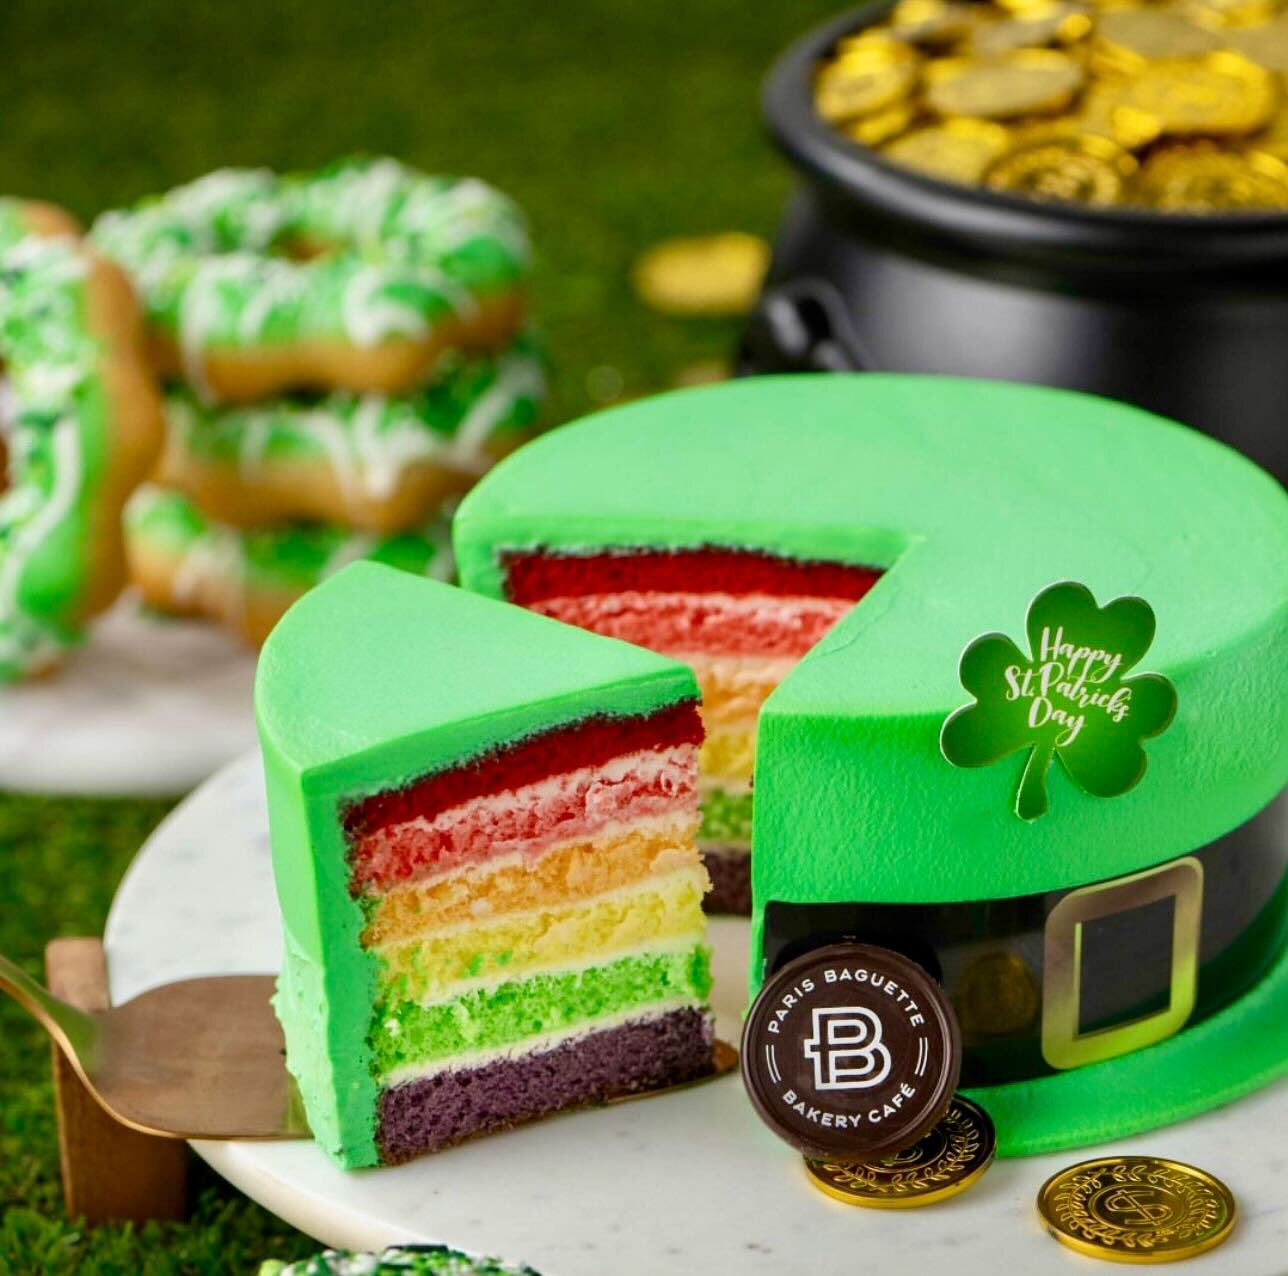 Happy St Paddy&rsquo;s Day ☘️ May your day be as sweet as a pot of gold 💰 at the end of a rainbow 🌈 @parisbaguette_usa 
.
.
.
#stpatricksday #stpatricksday #stpaddysday #stpaddys #stpatricksdaycookies #stpatricksdaycake #stpatricksdaydessert #lucko